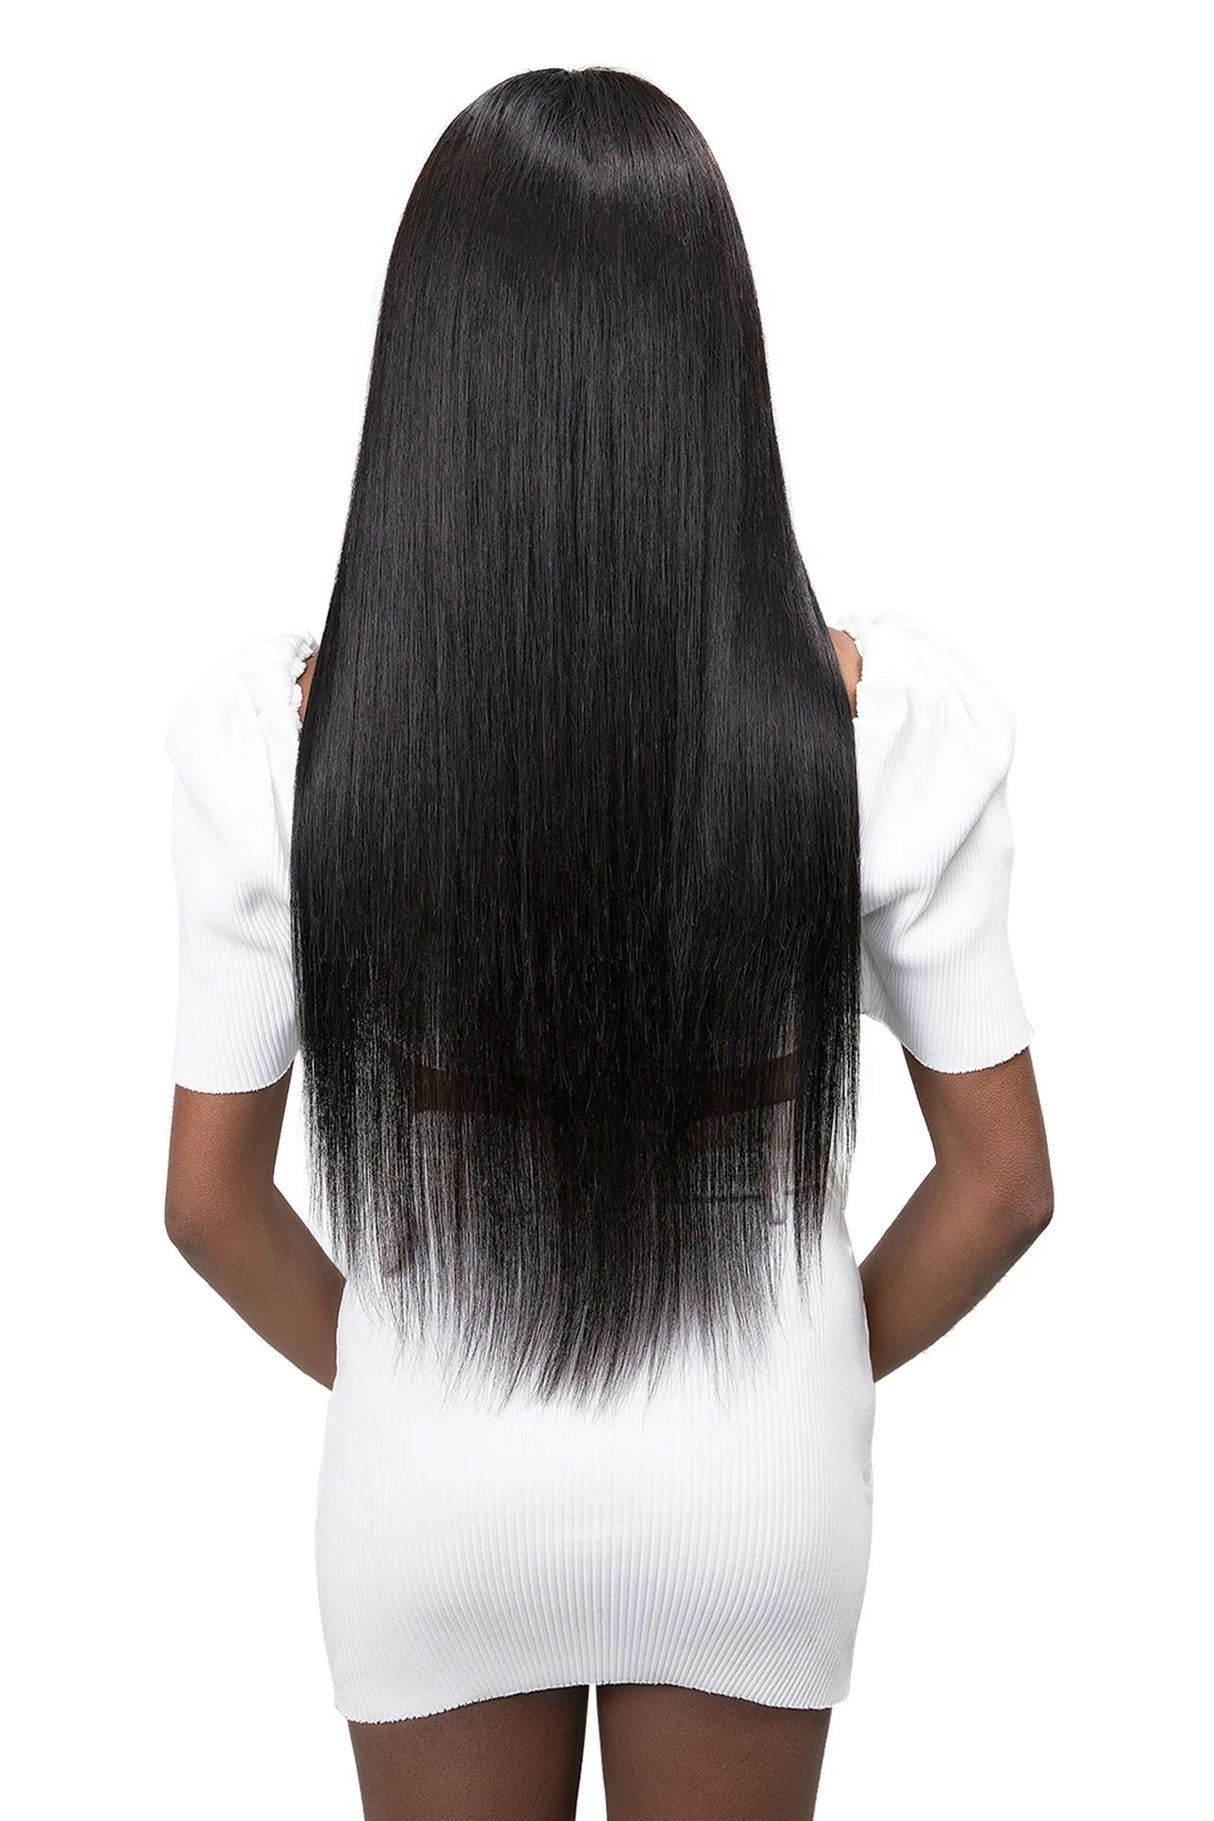 Femi Collection® EDGE™ Deep Part Lace Straight Wig 28"